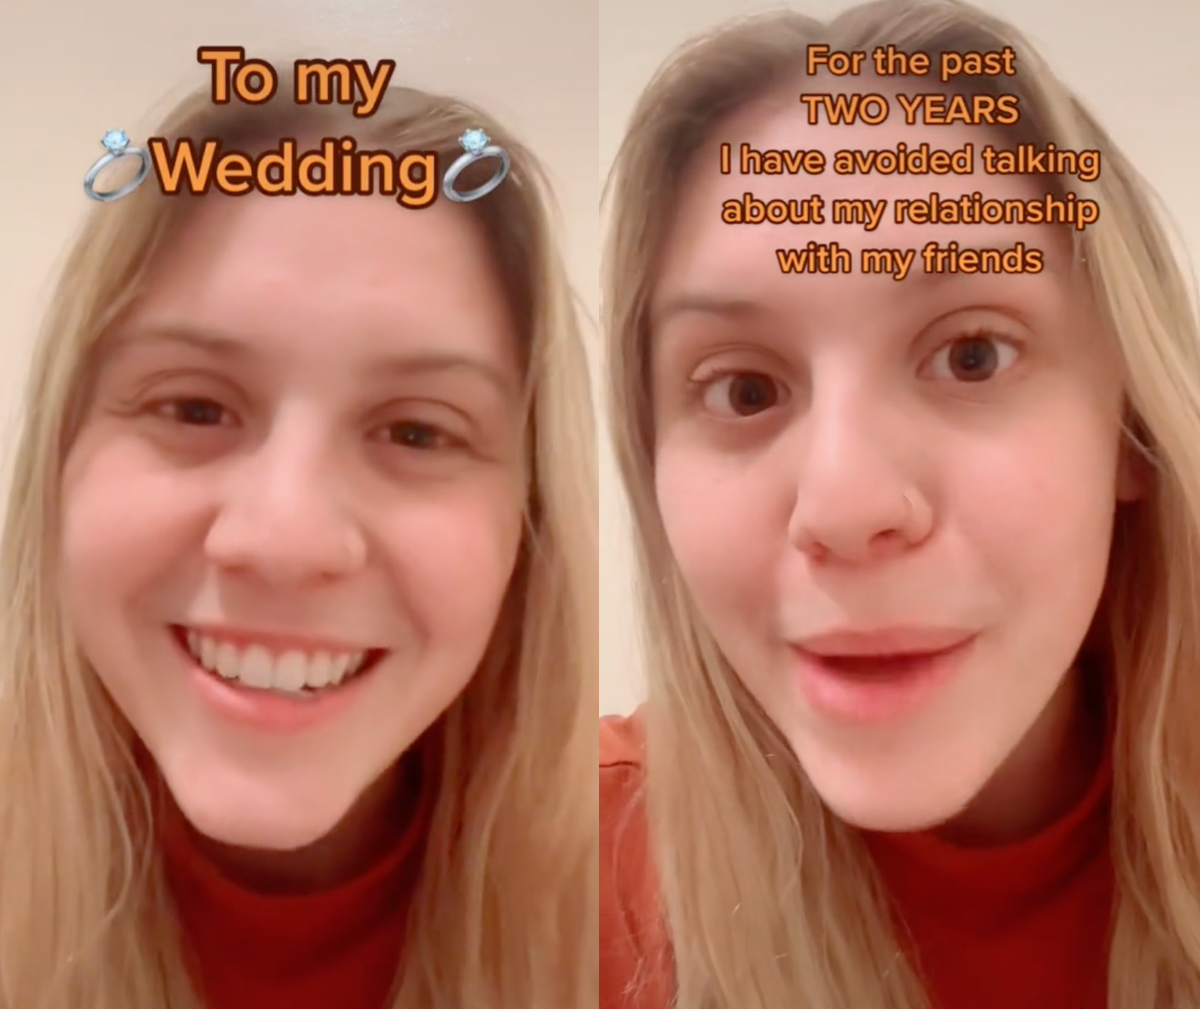 Woman sparks debate after revealing that her friends didn’t know about her wedding until she sent invitations